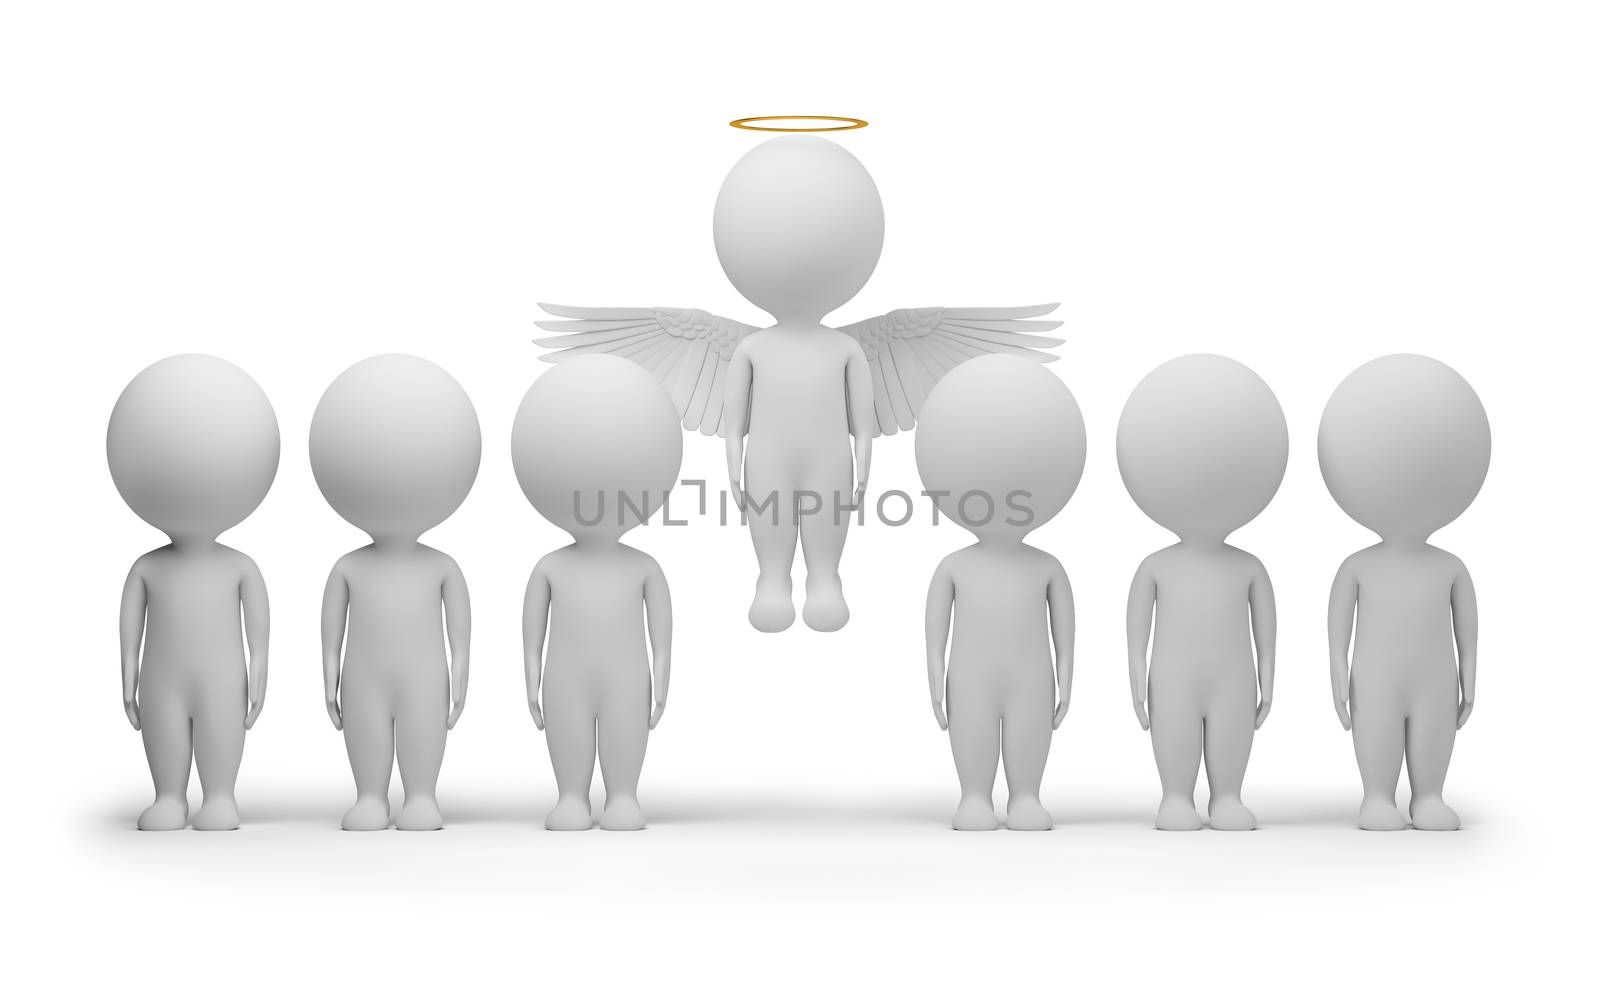 3d small people - flied up angel. 3d image. Isolated white background.